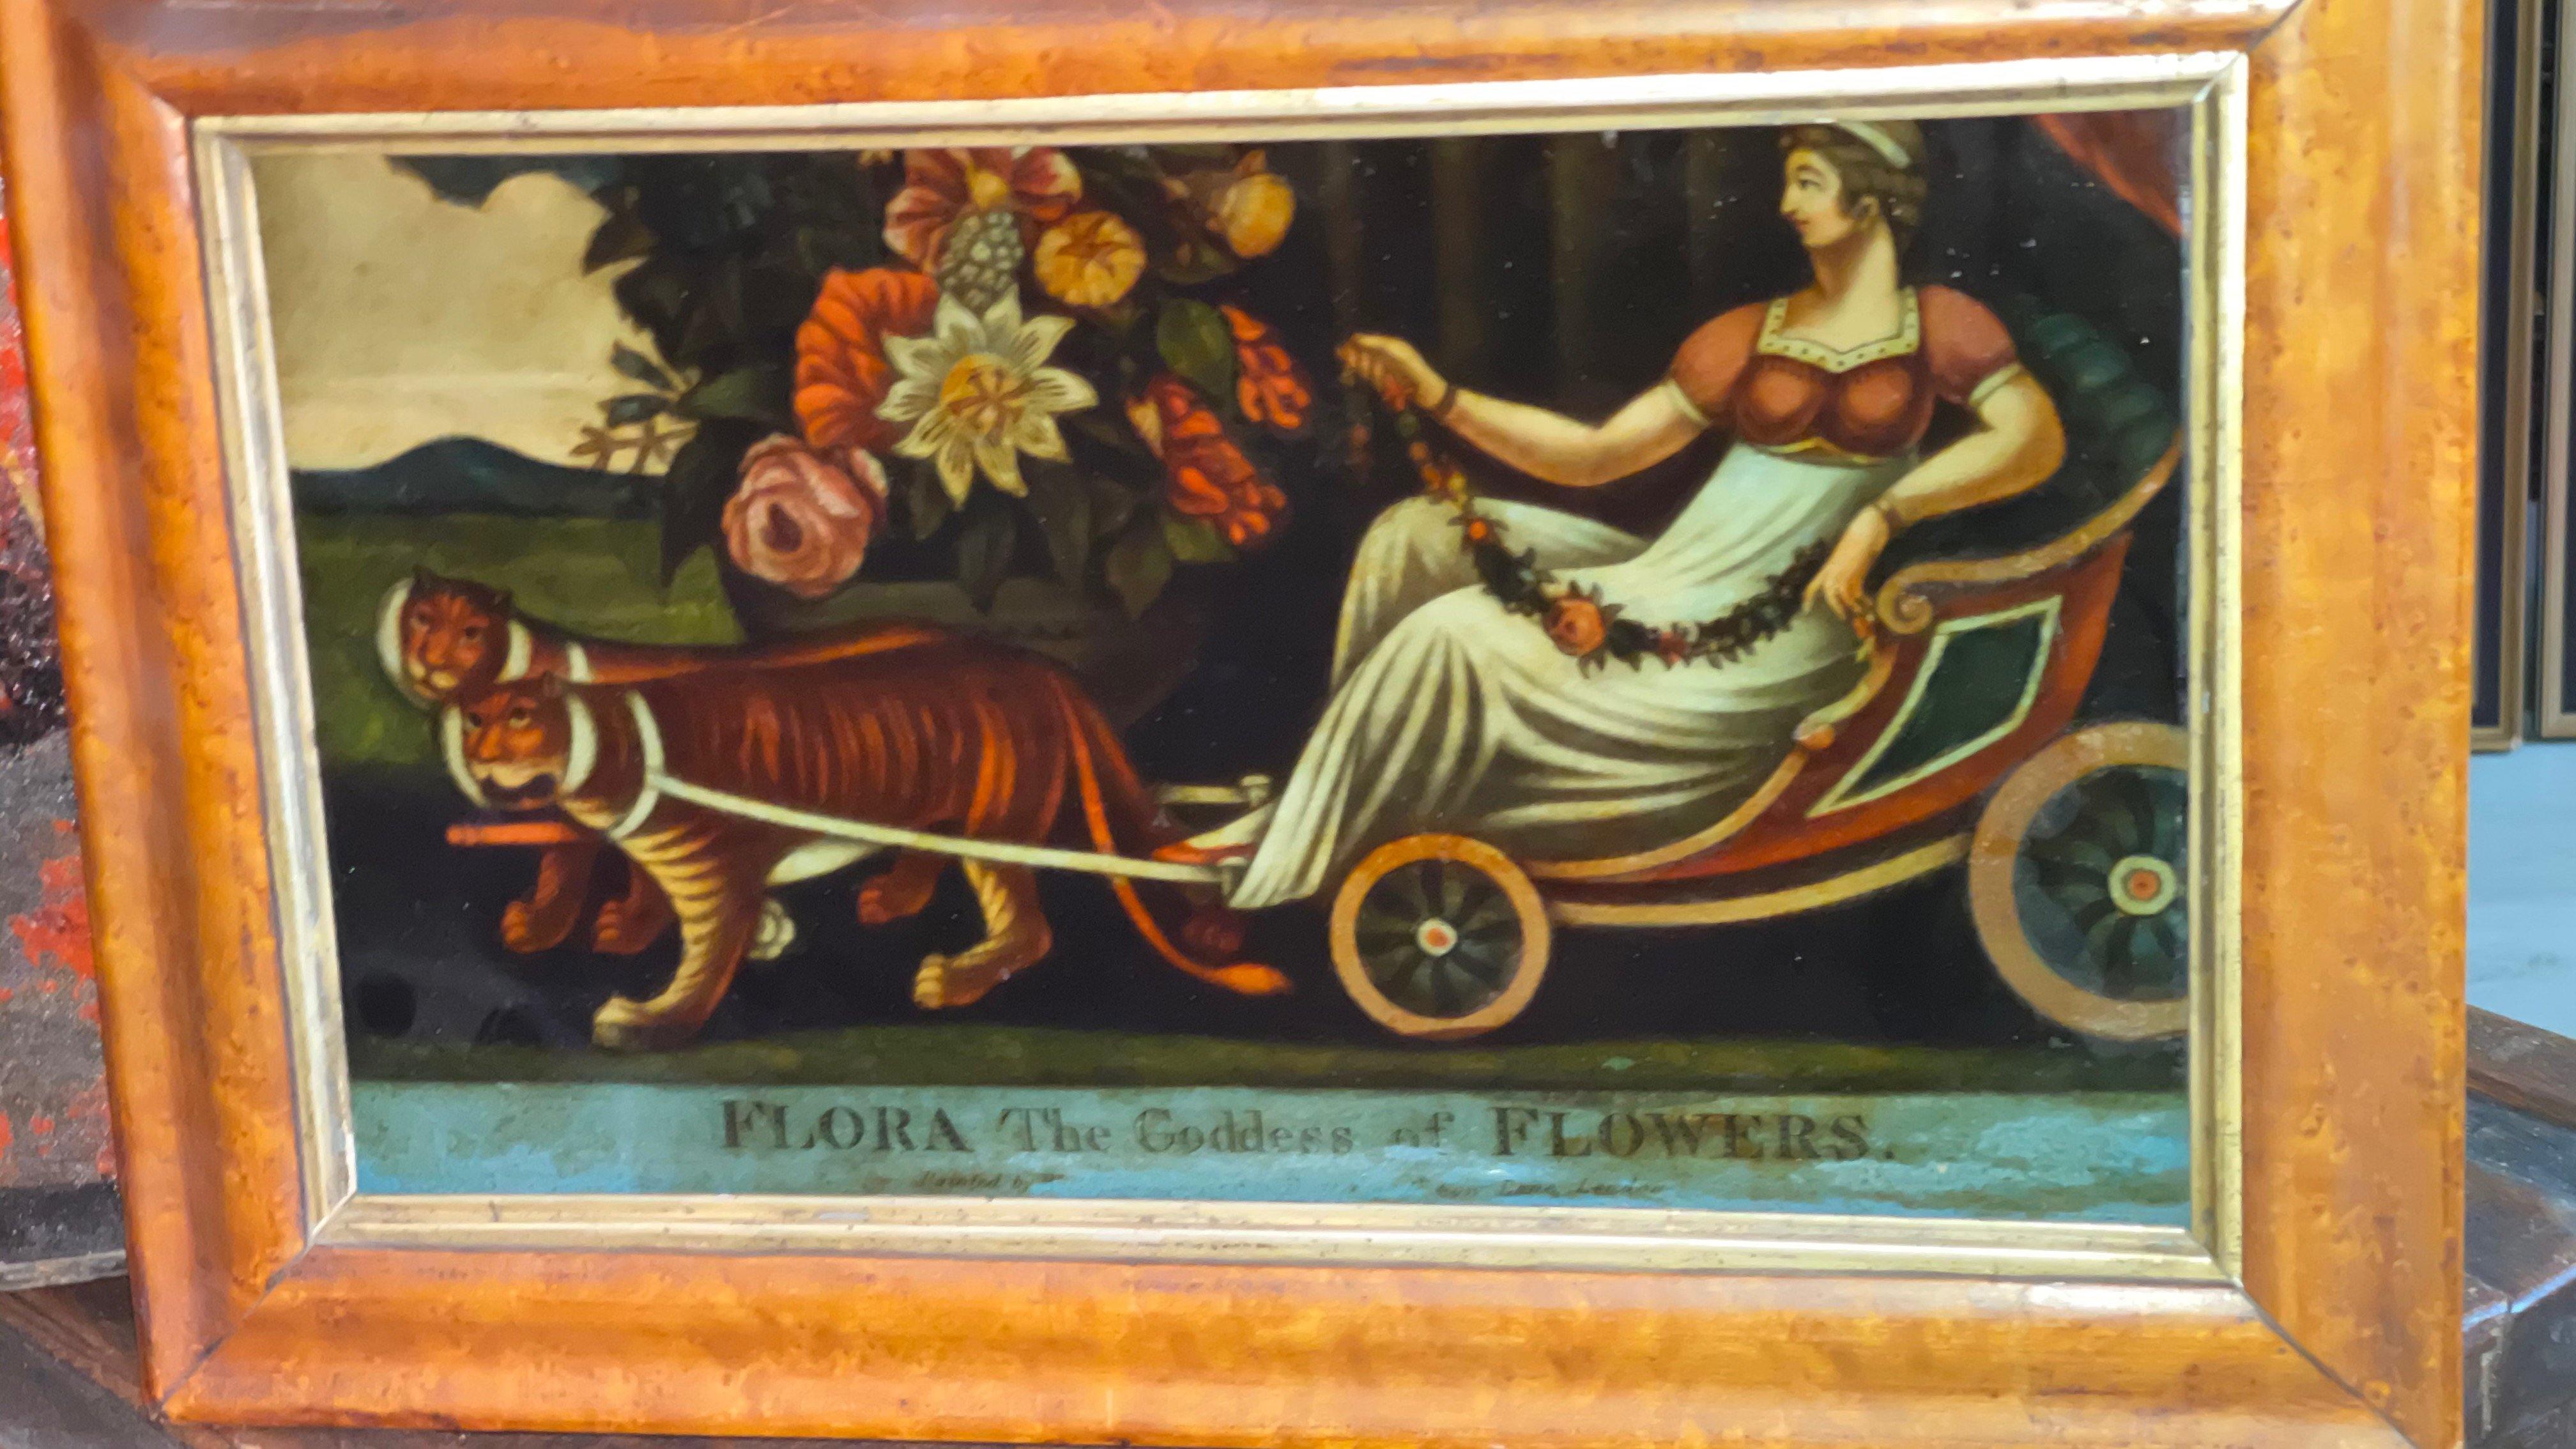 Early 19th Century Painted Glass Transfer Flora the Goddess of Flowers 1